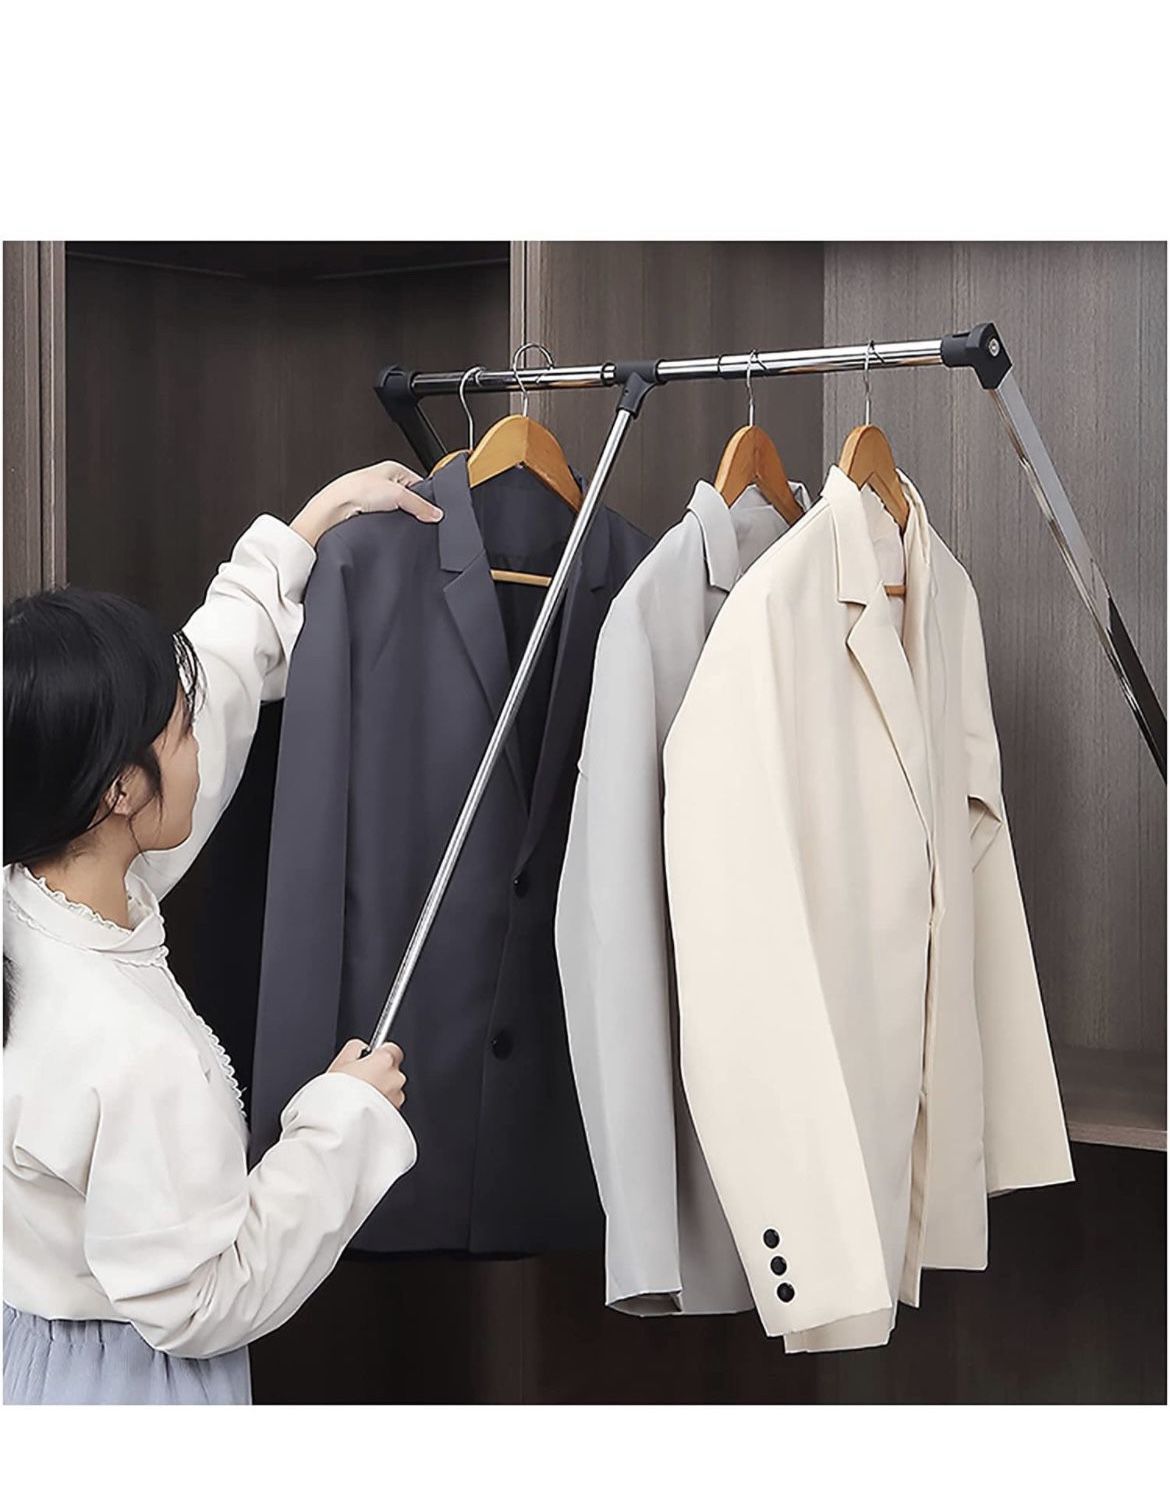 Floating Shelves Liftable Clothes Hanger Dormitory Clothes Bar Closet Hardware Pull-Down Clothes Rail Closet Pole Clothing Finishing Rack, Adjustable 